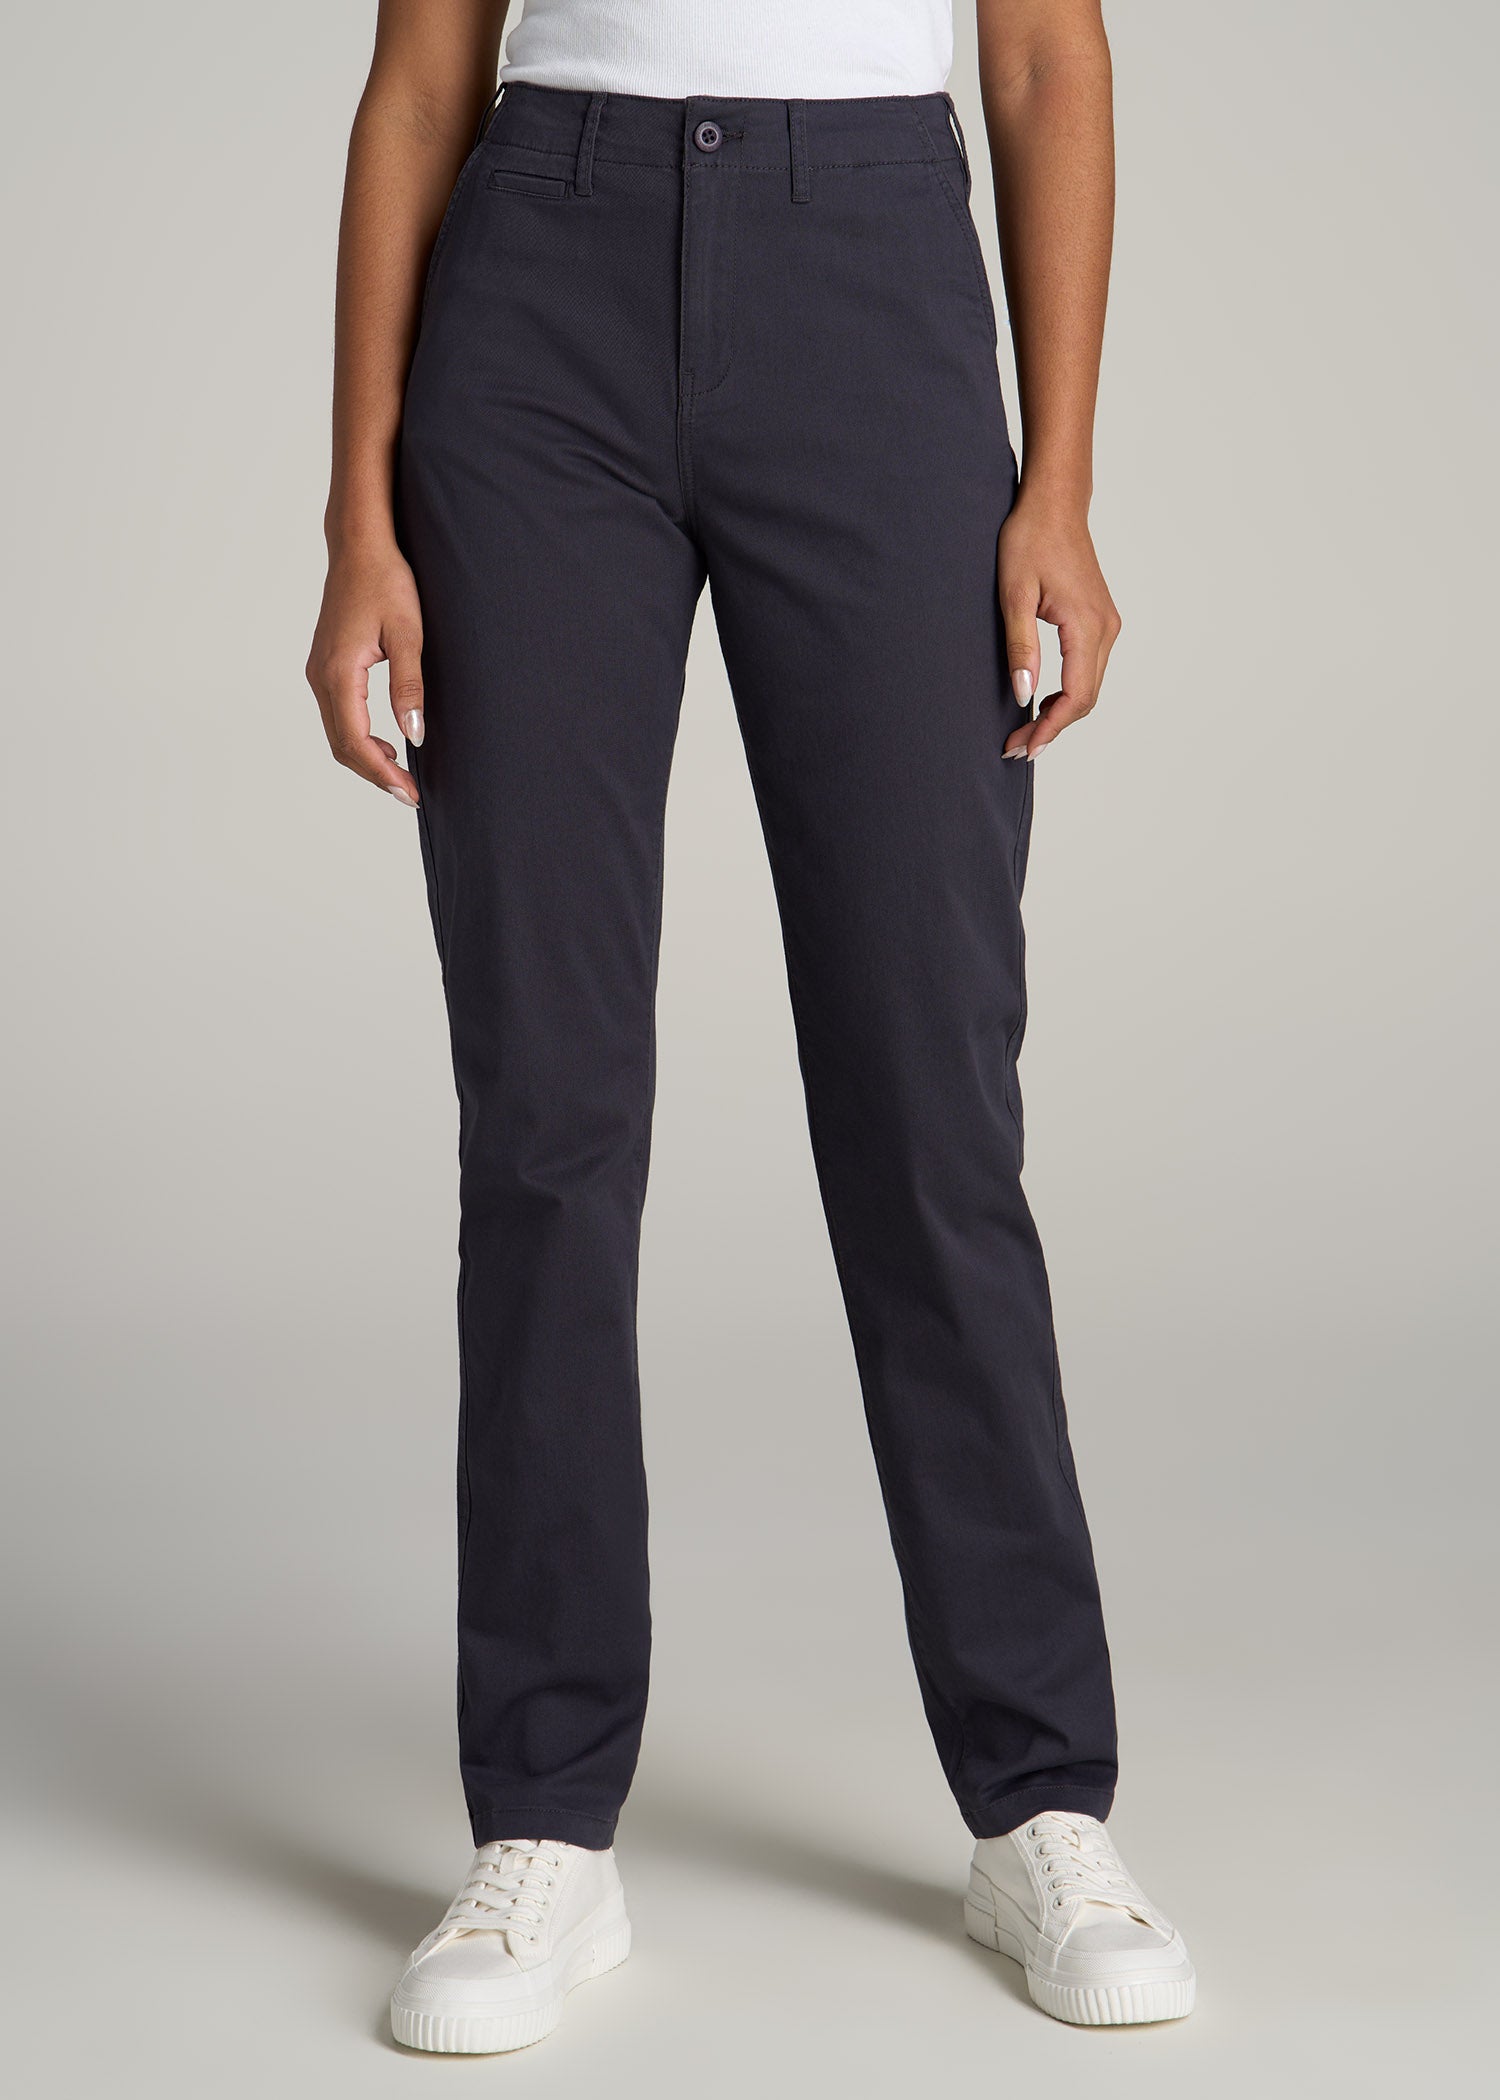 High Rise Tapered Chino Pants for Tall Women | American Tall